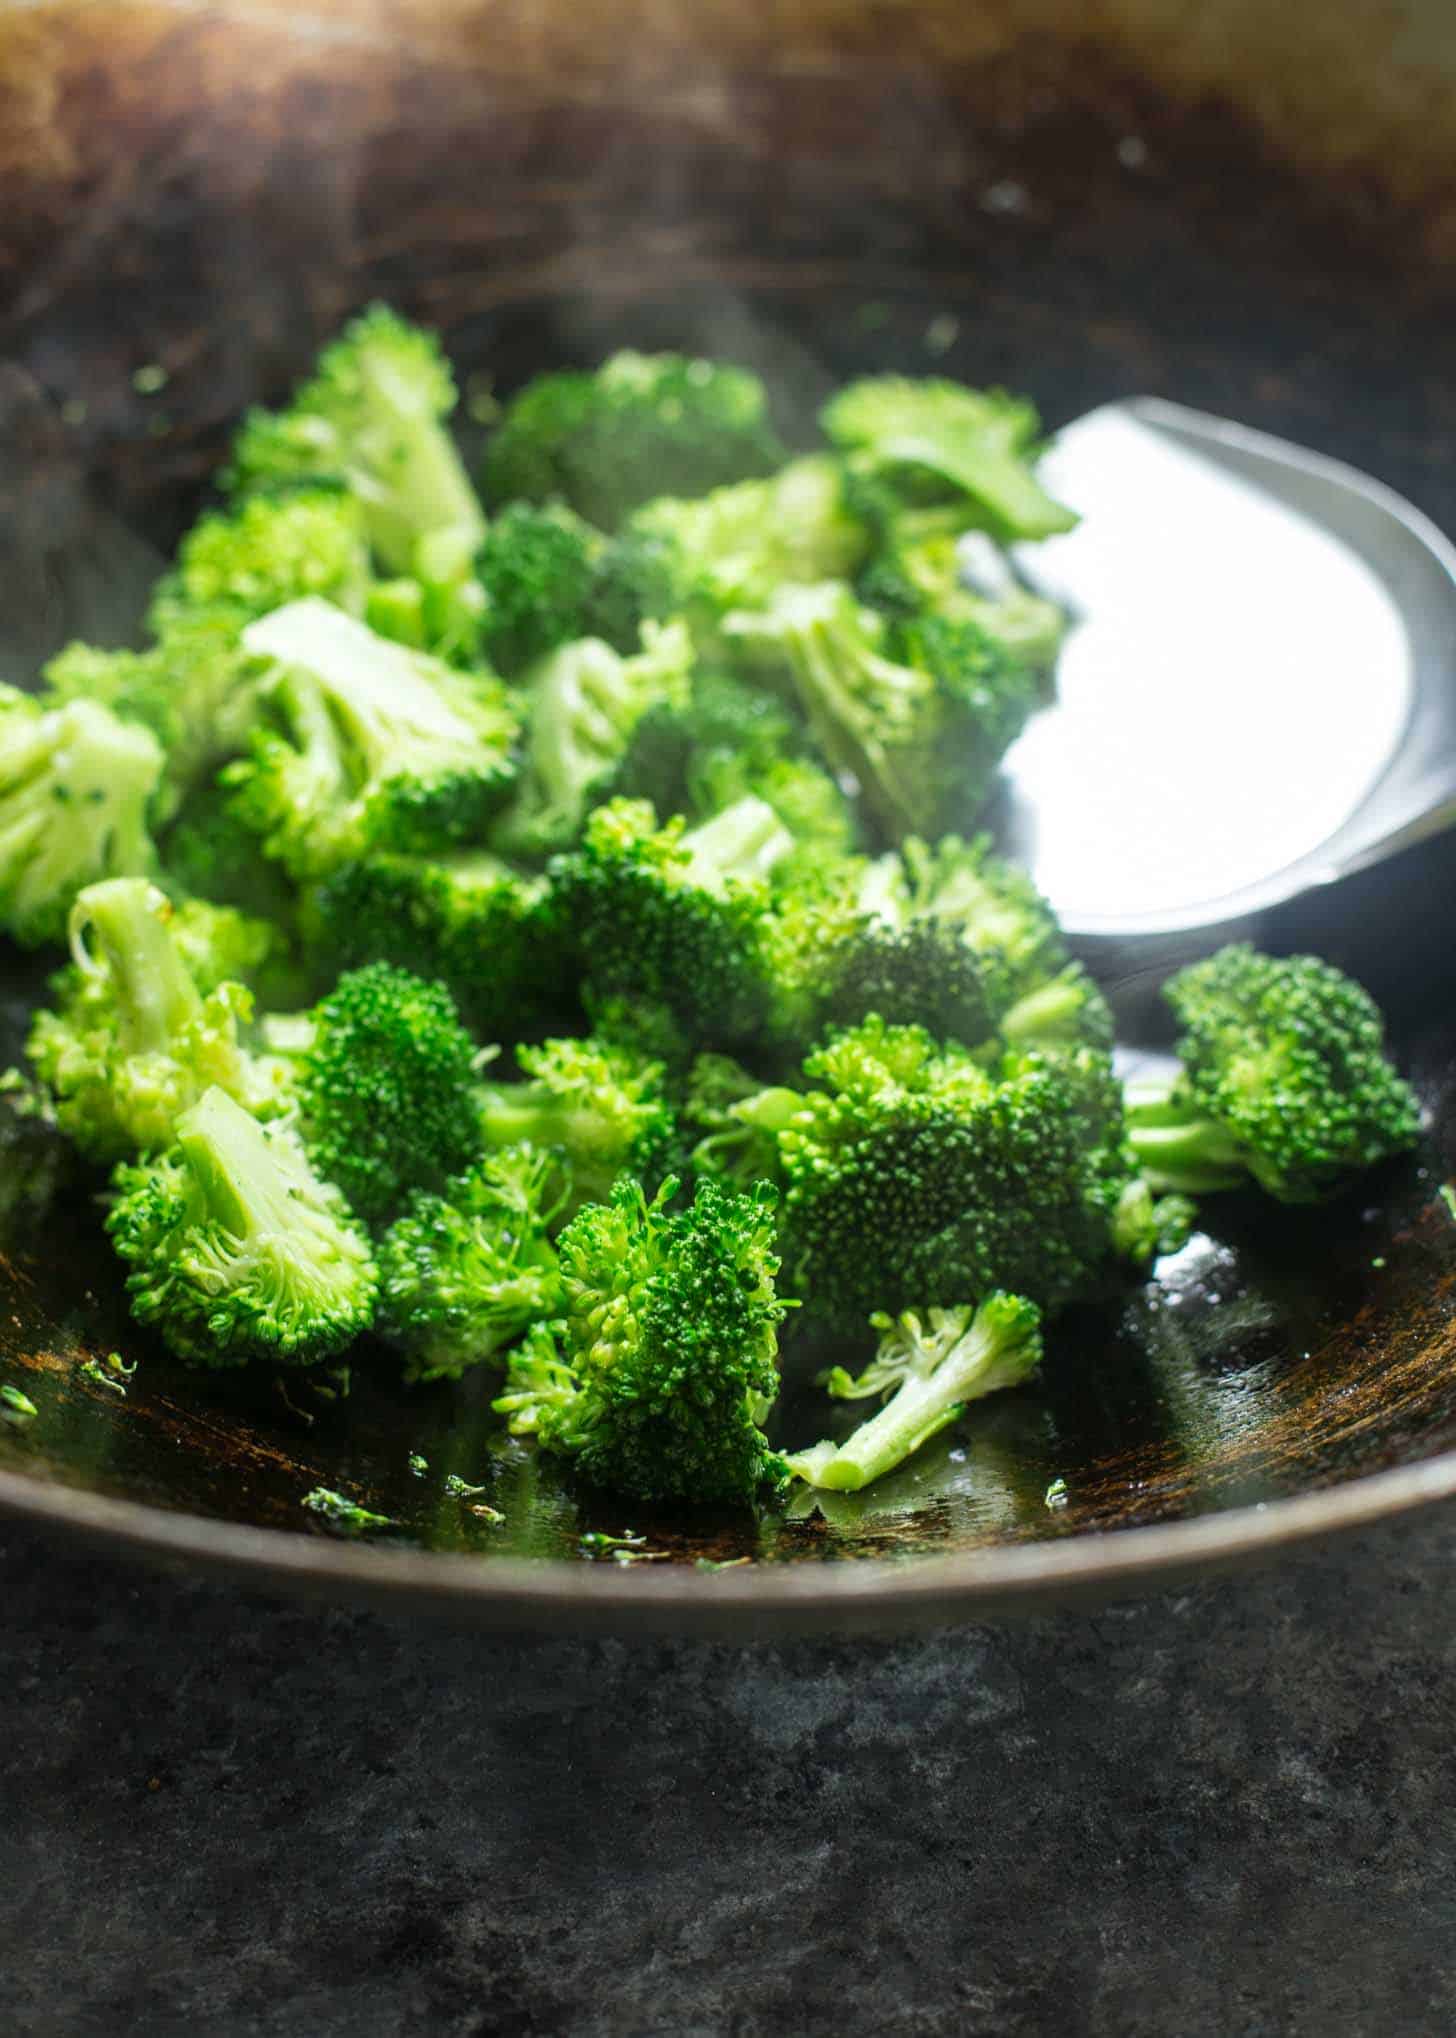 cooking broccoli in a wok